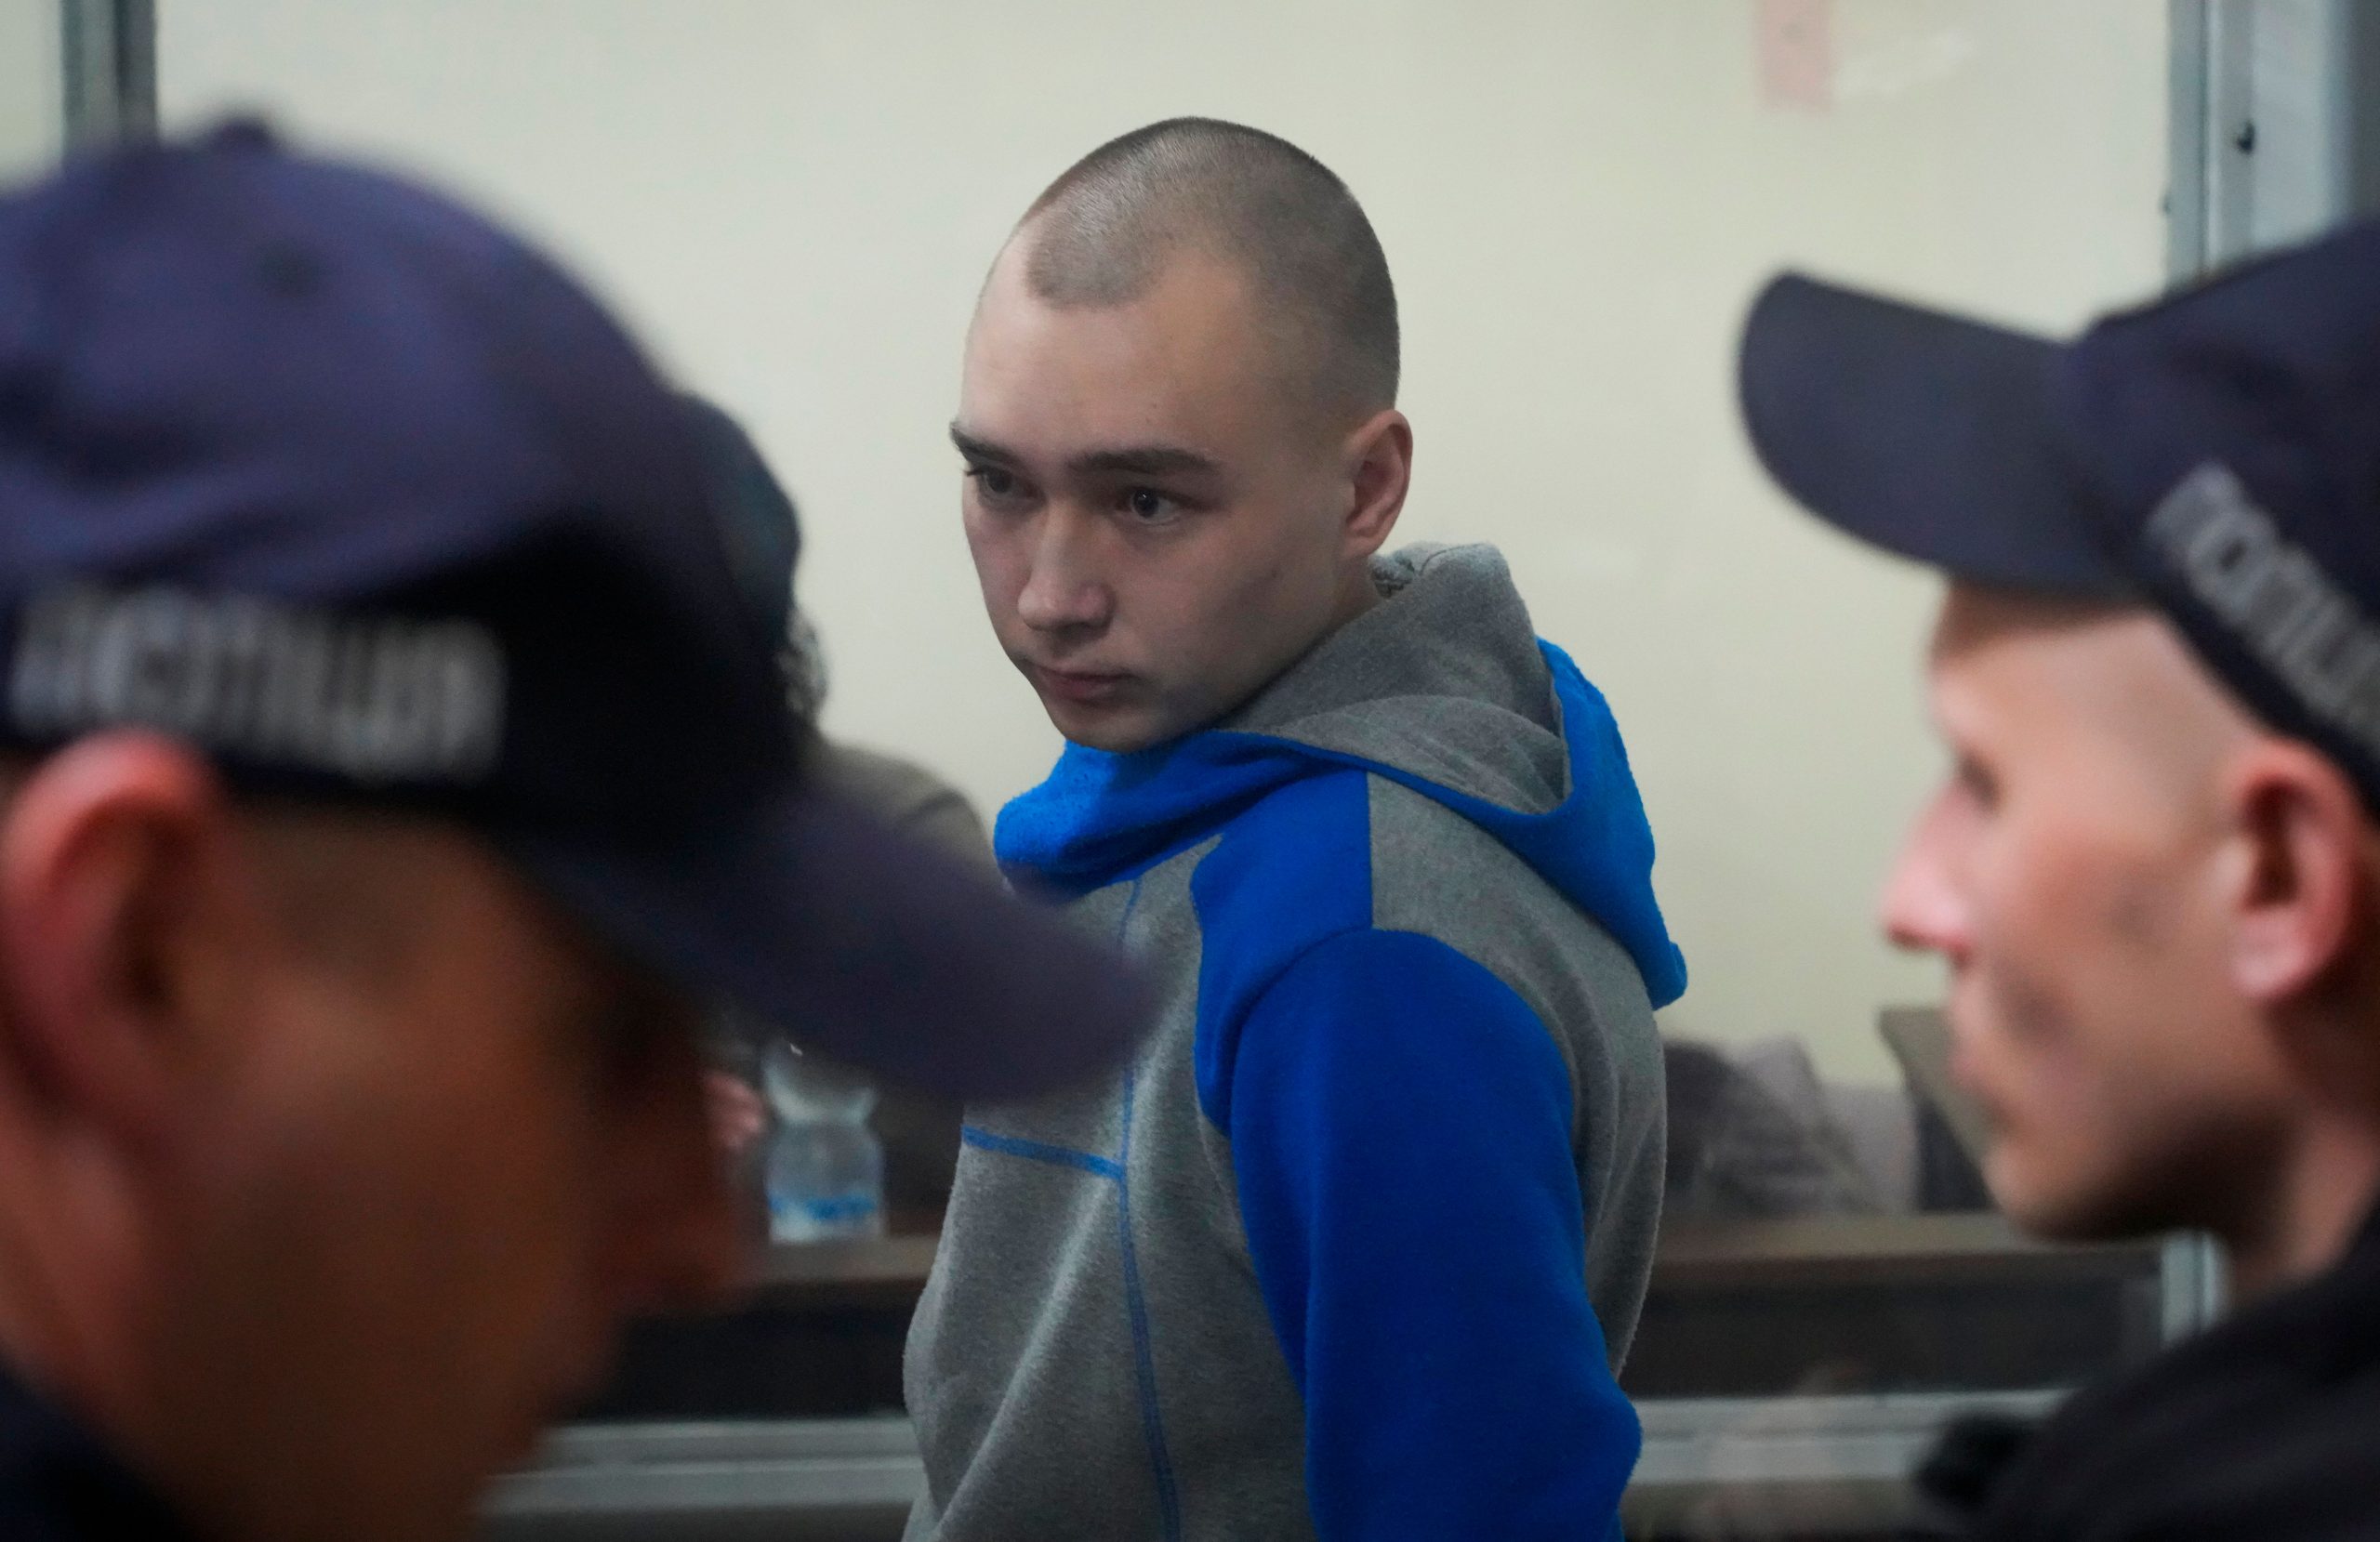 Russian soldier Vadim Shyshimarin pleads guilty over war crimes in Kyiv